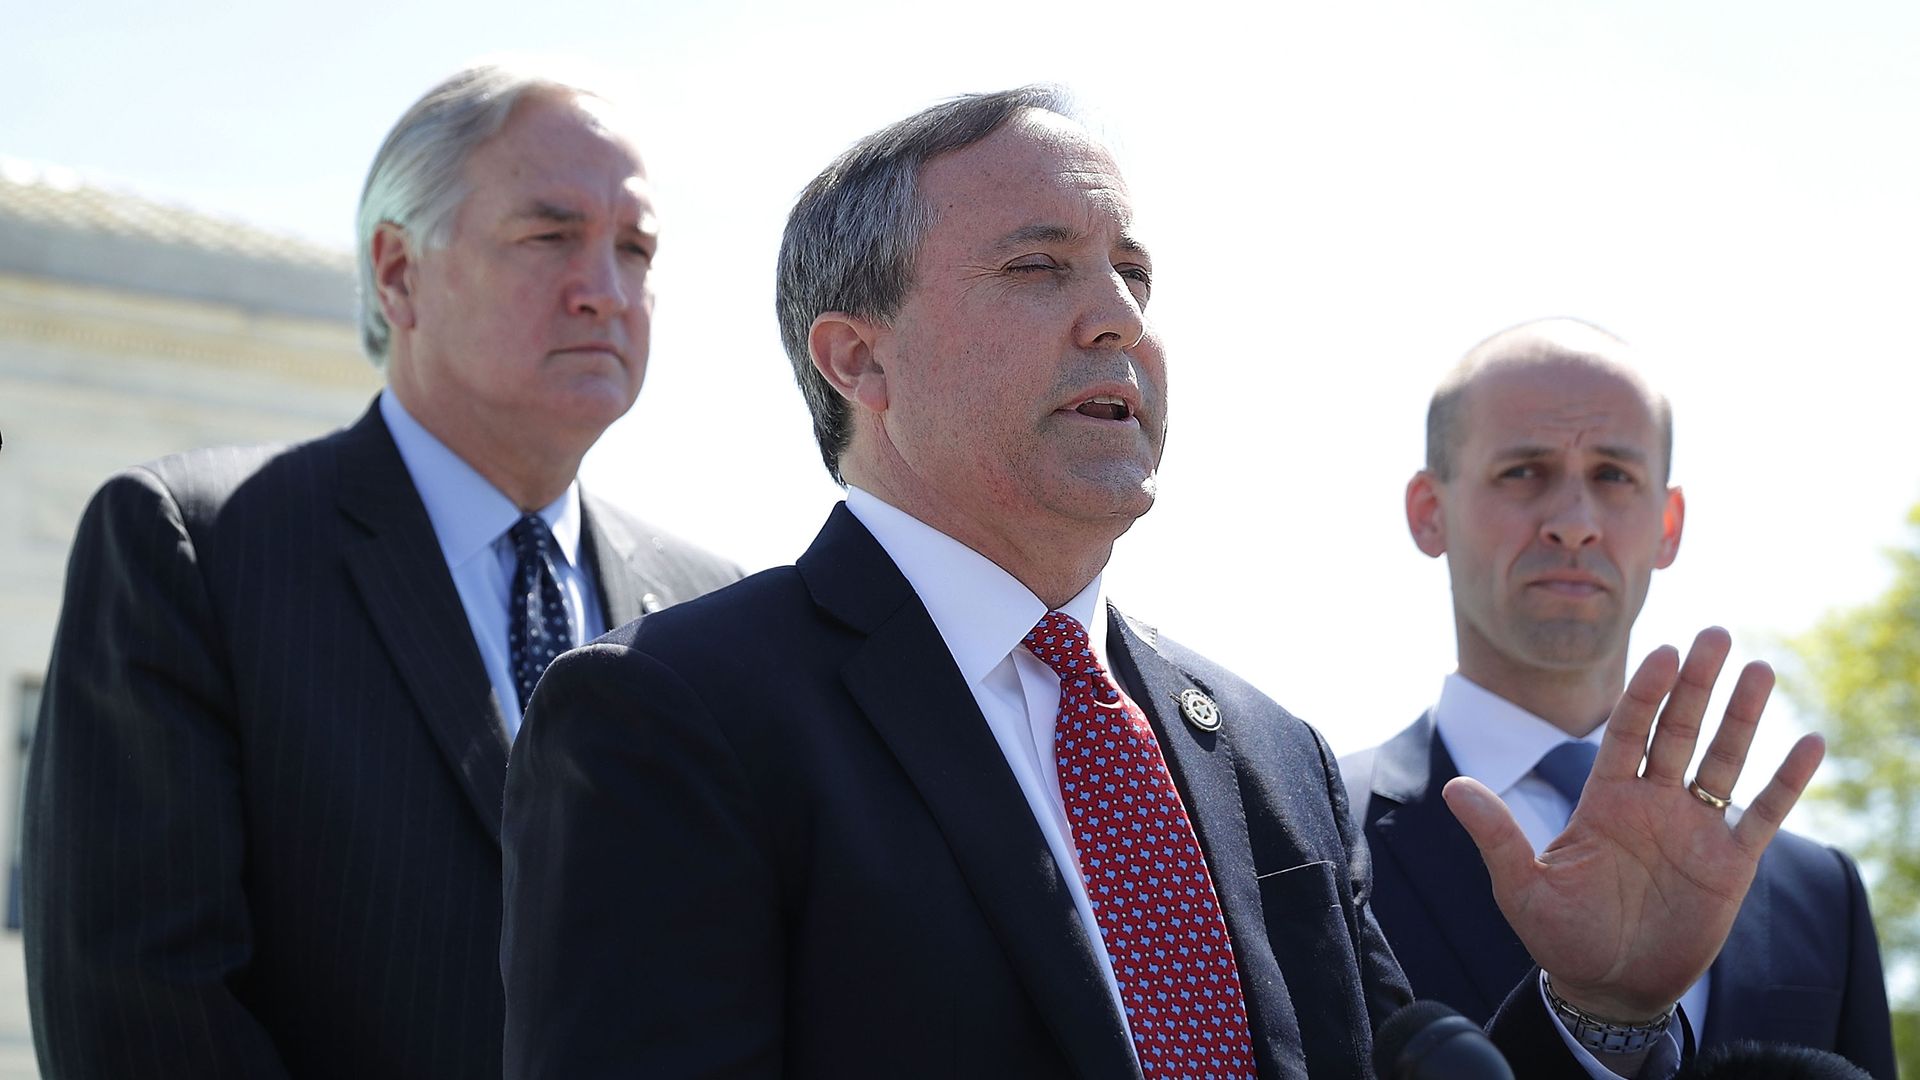 Texas AG Ken Paxton speaking outside at a podium 